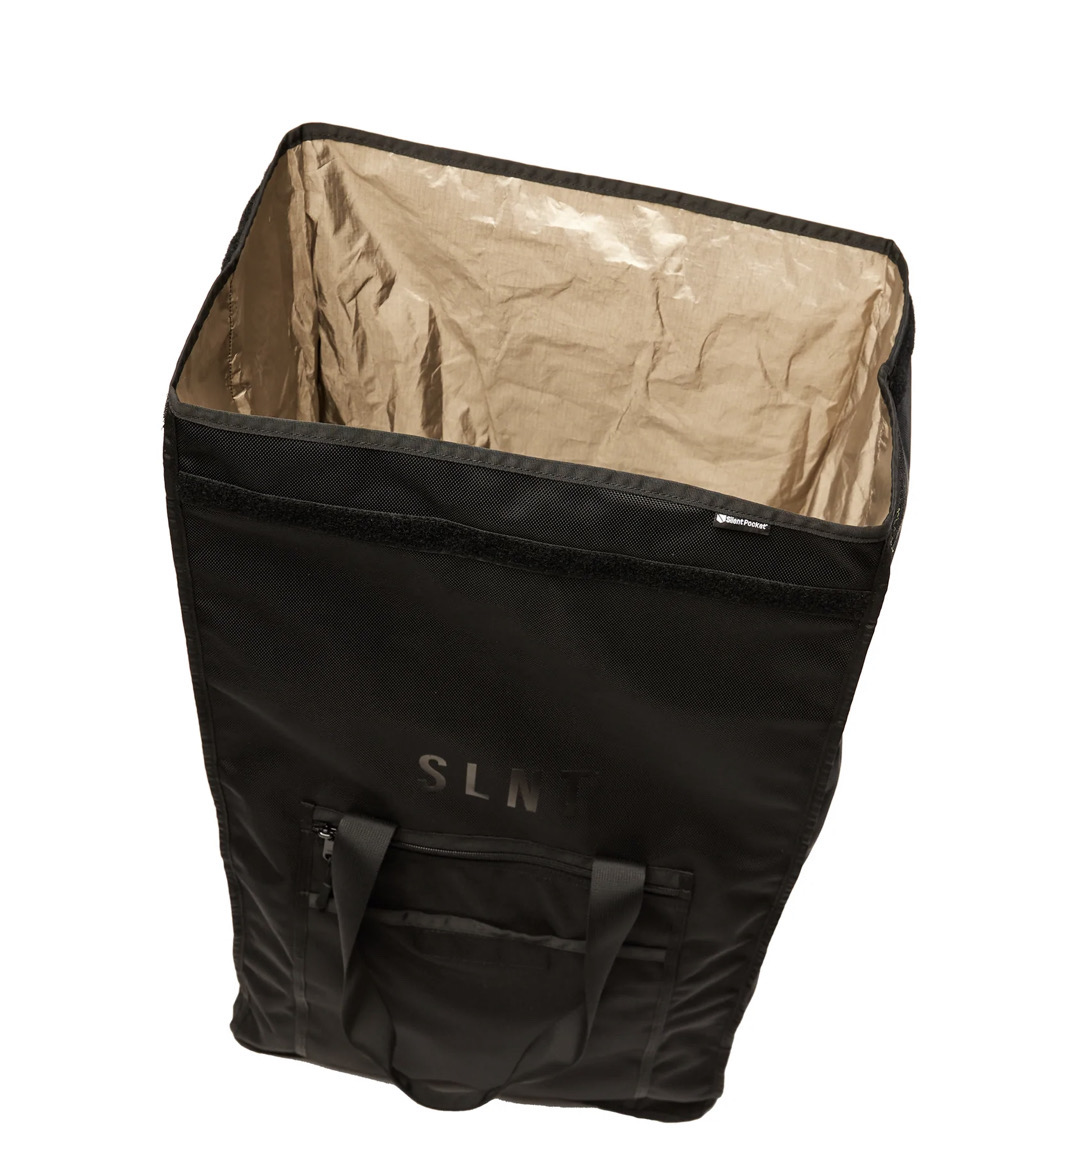 SLNT , Computer Tower Bag with Faraday Cage, Faraday Cage